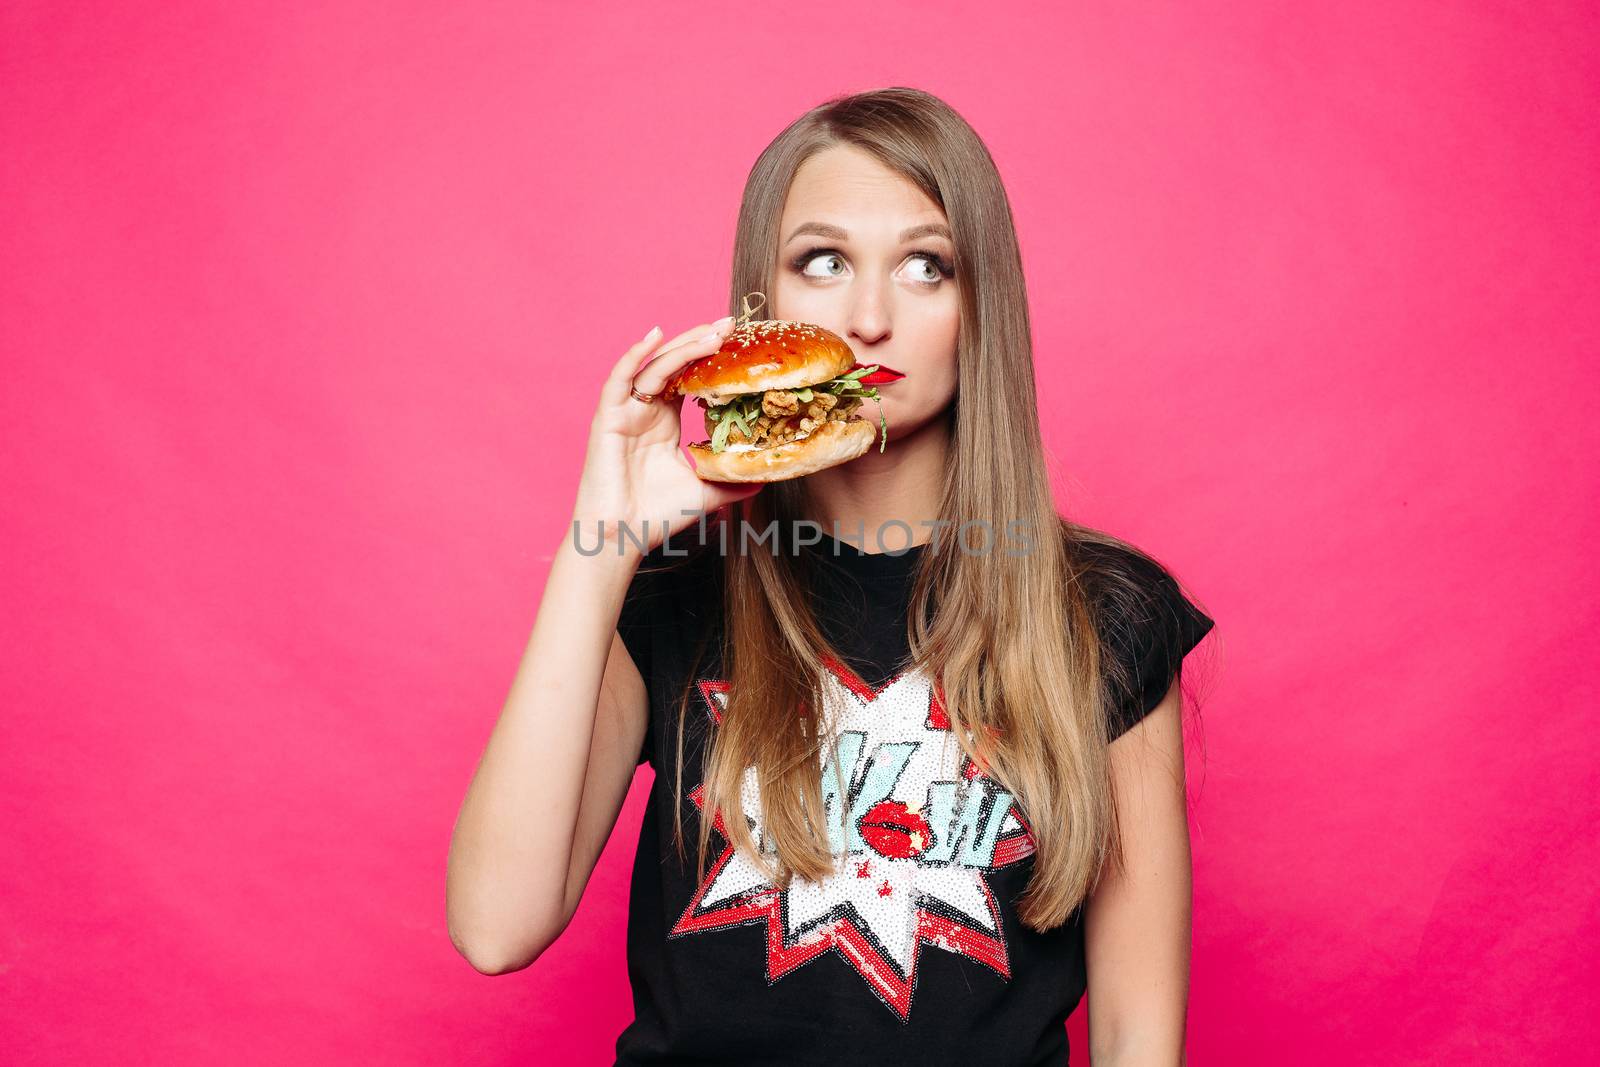 Front view of sadly young girl looking at side and thinking eating tasty humburger or no. Pretty woman wearing in black t-shirt holding big cheeseburger, posing on pink background. Concept of diet.